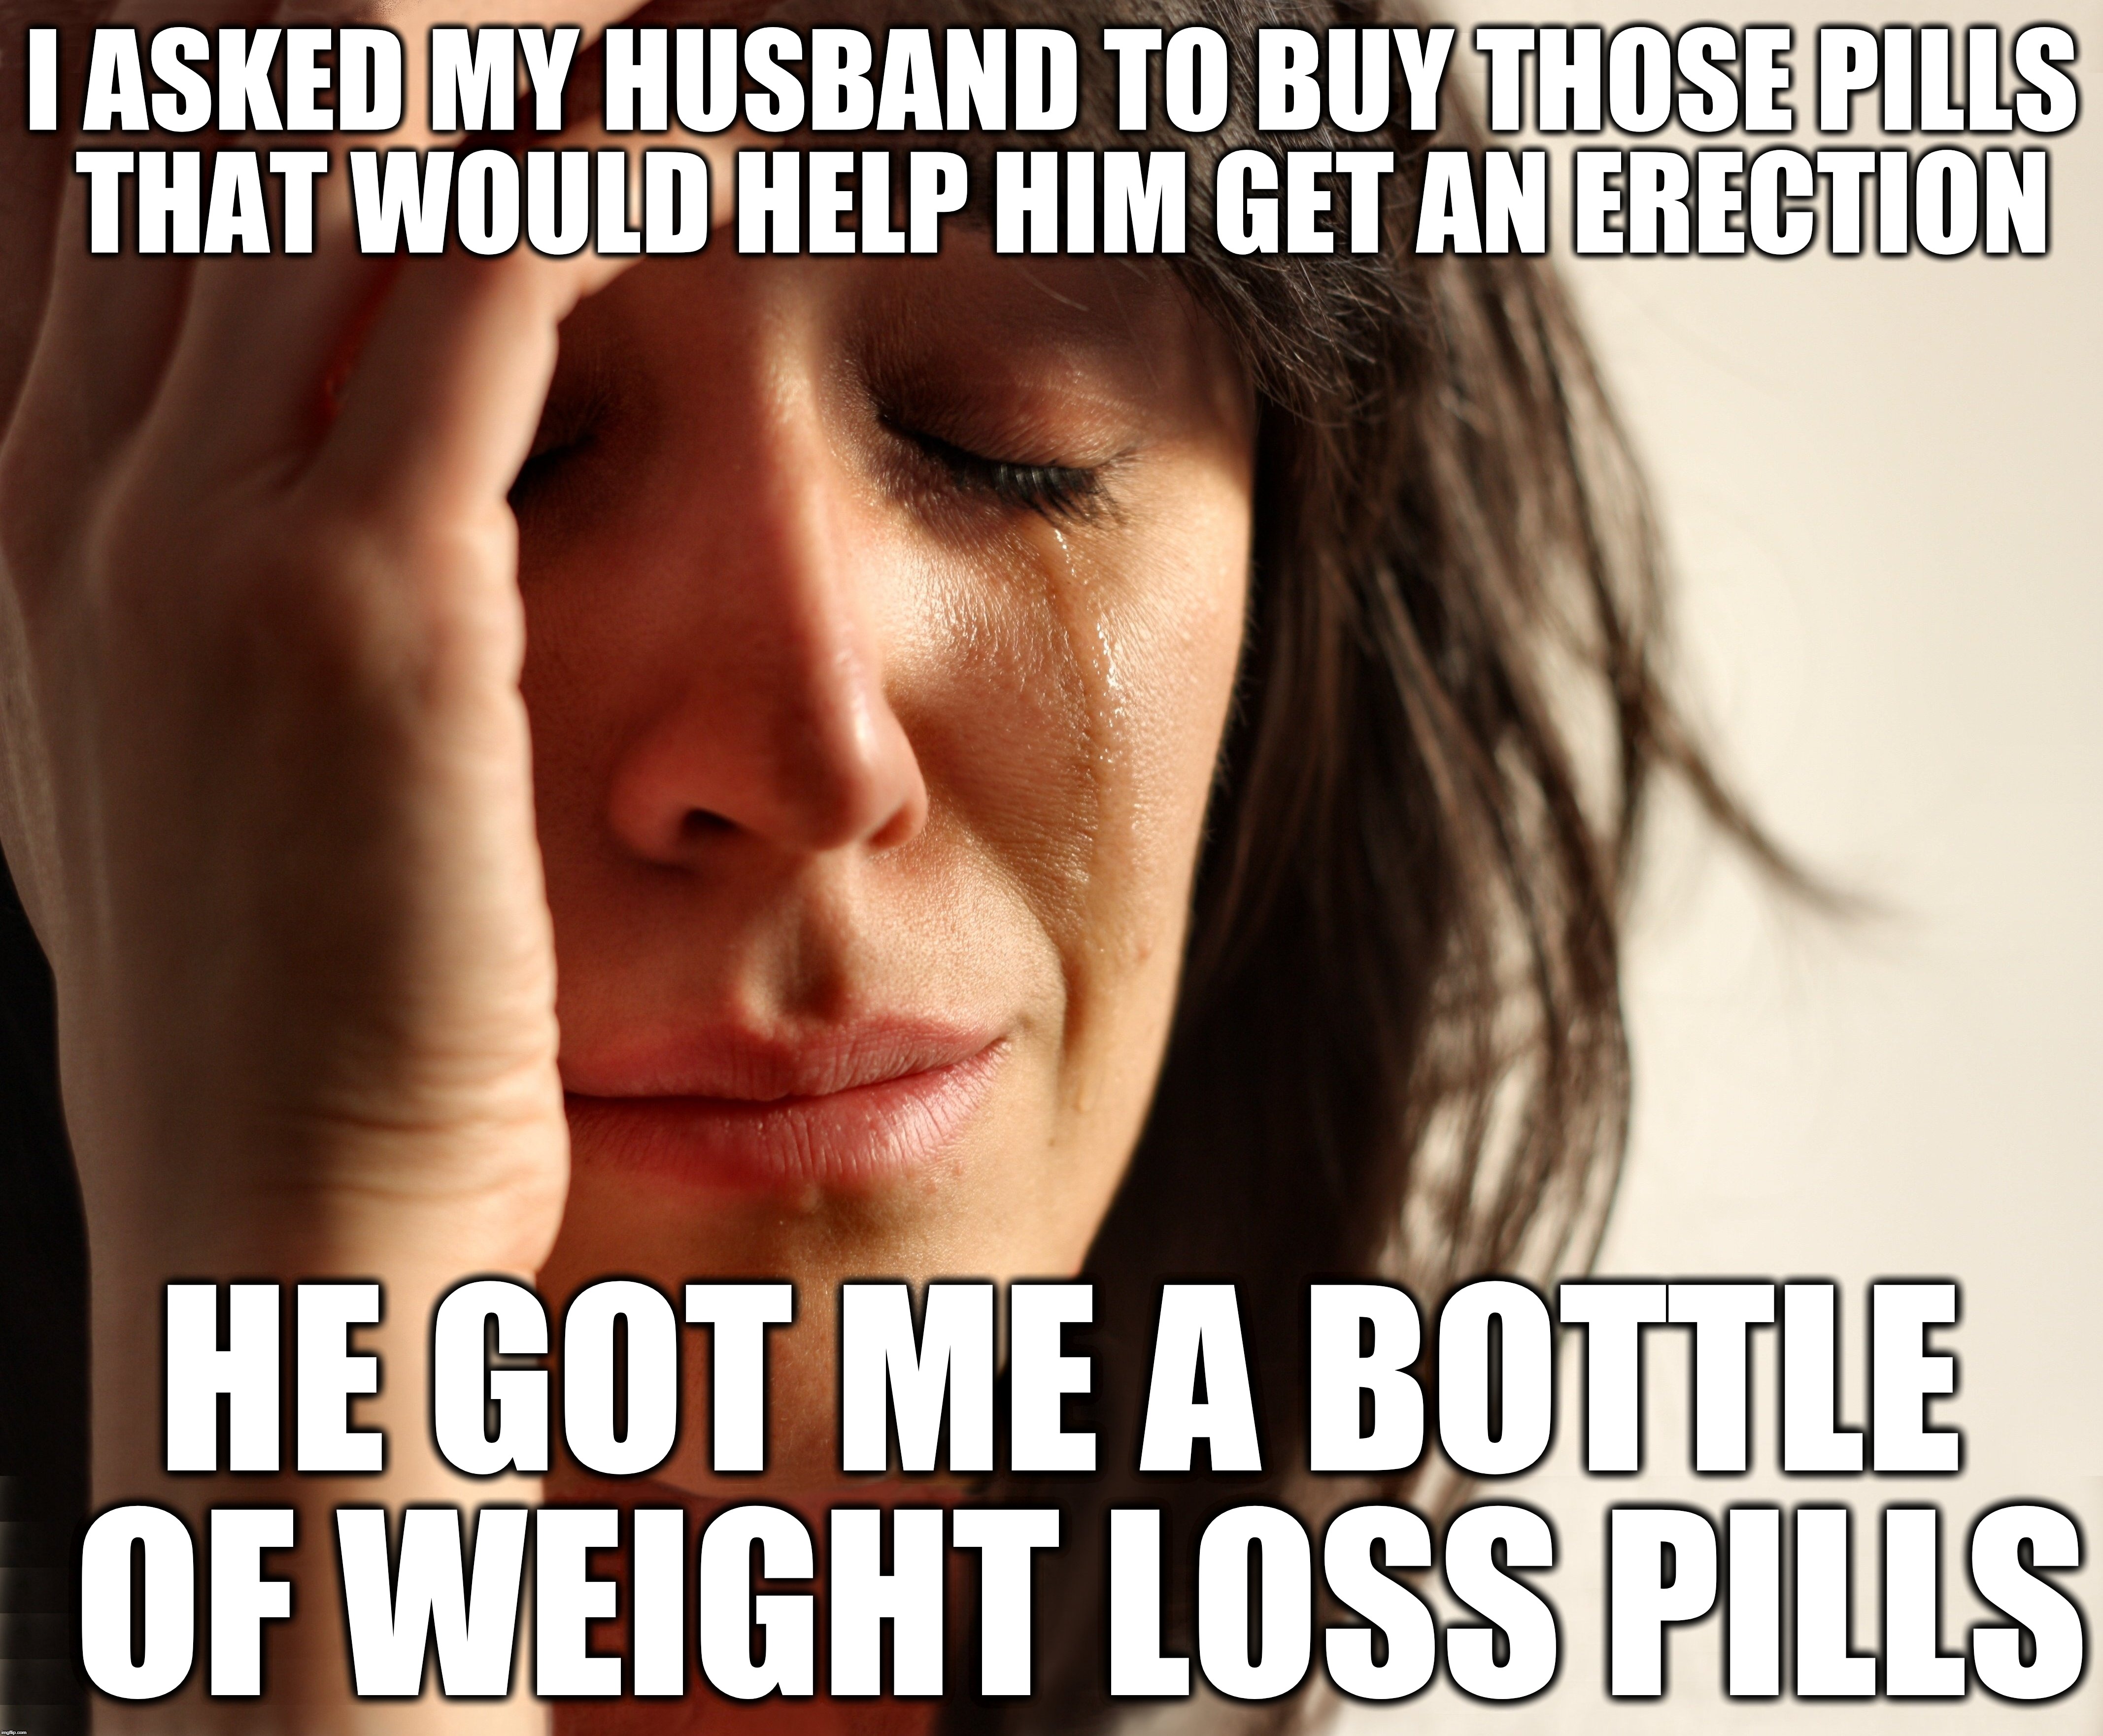 Depressed wife | I ASKED MY HUSBAND TO BUY THOSE PILLS THAT WOULD HELP HIM GET AN ERECTION; HE GOT ME A BOTTLE OF WEIGHT LOSS PILLS | image tagged in fat wife,depression,divorce | made w/ Imgflip meme maker